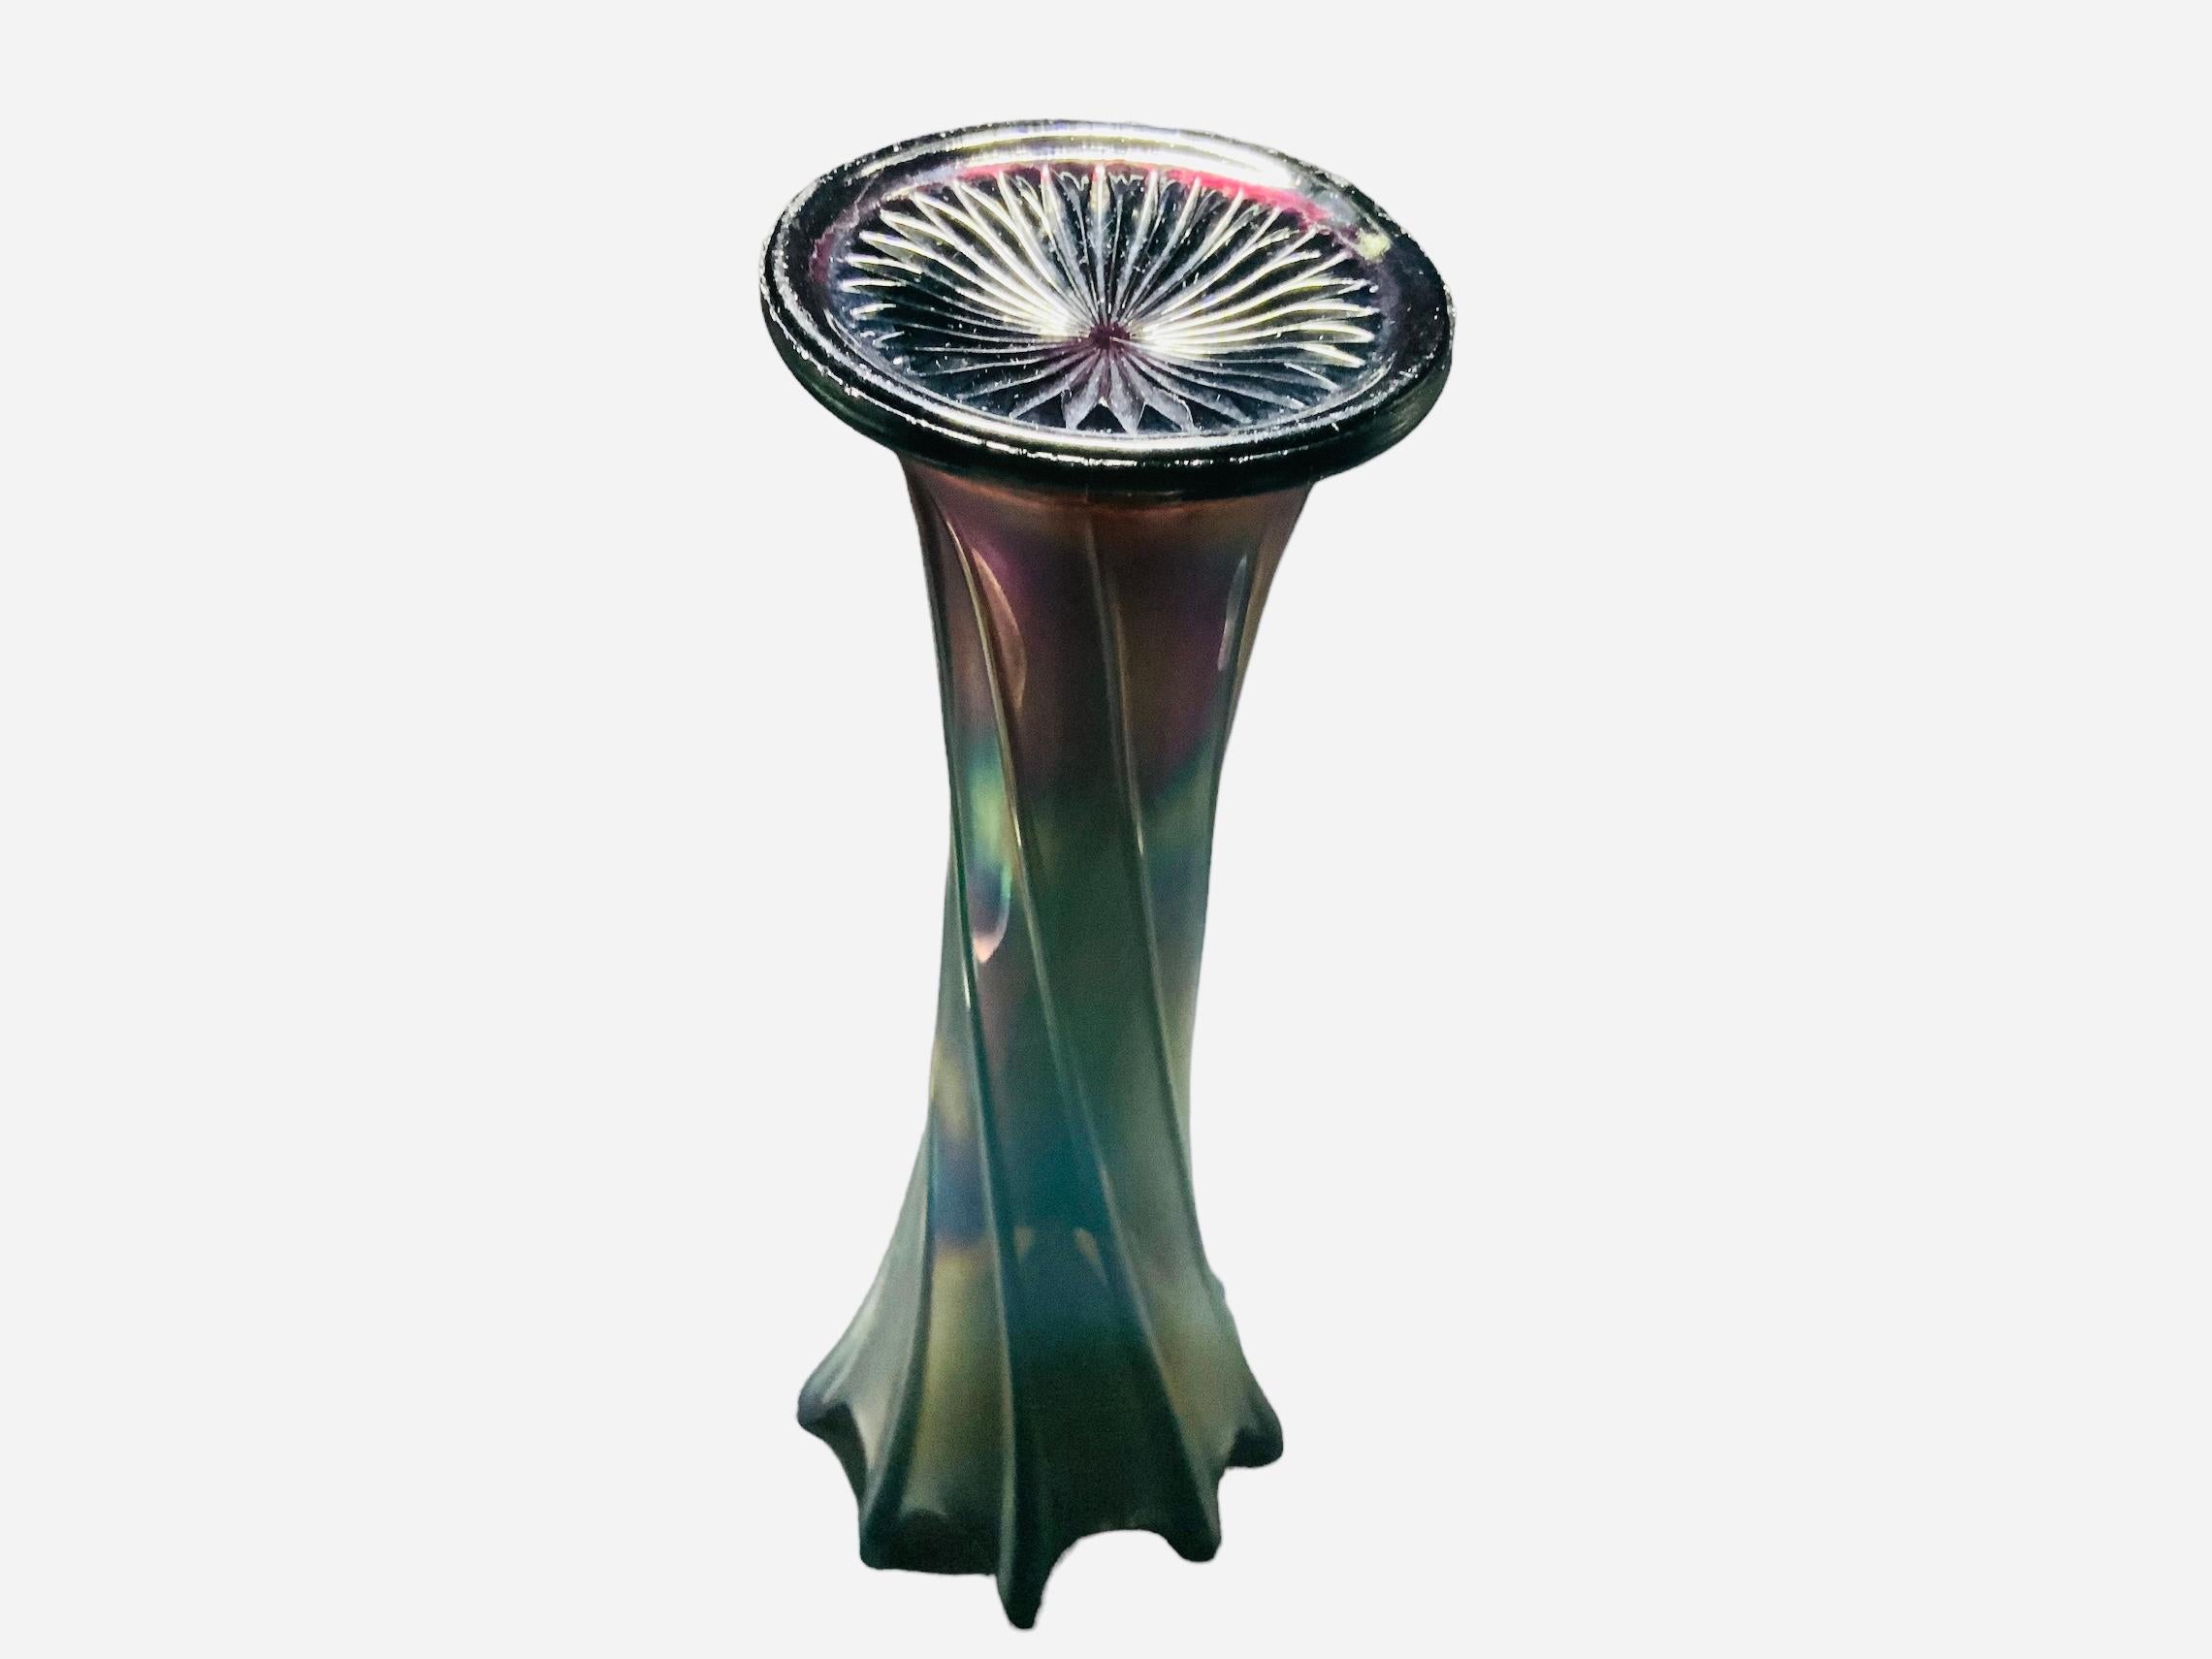 This is a large iridescent glass flower vase. It depicts a multicolored glass flower vase with high waves upper border. The whole vase is adorned with reeded bands that match the tips of the waves.